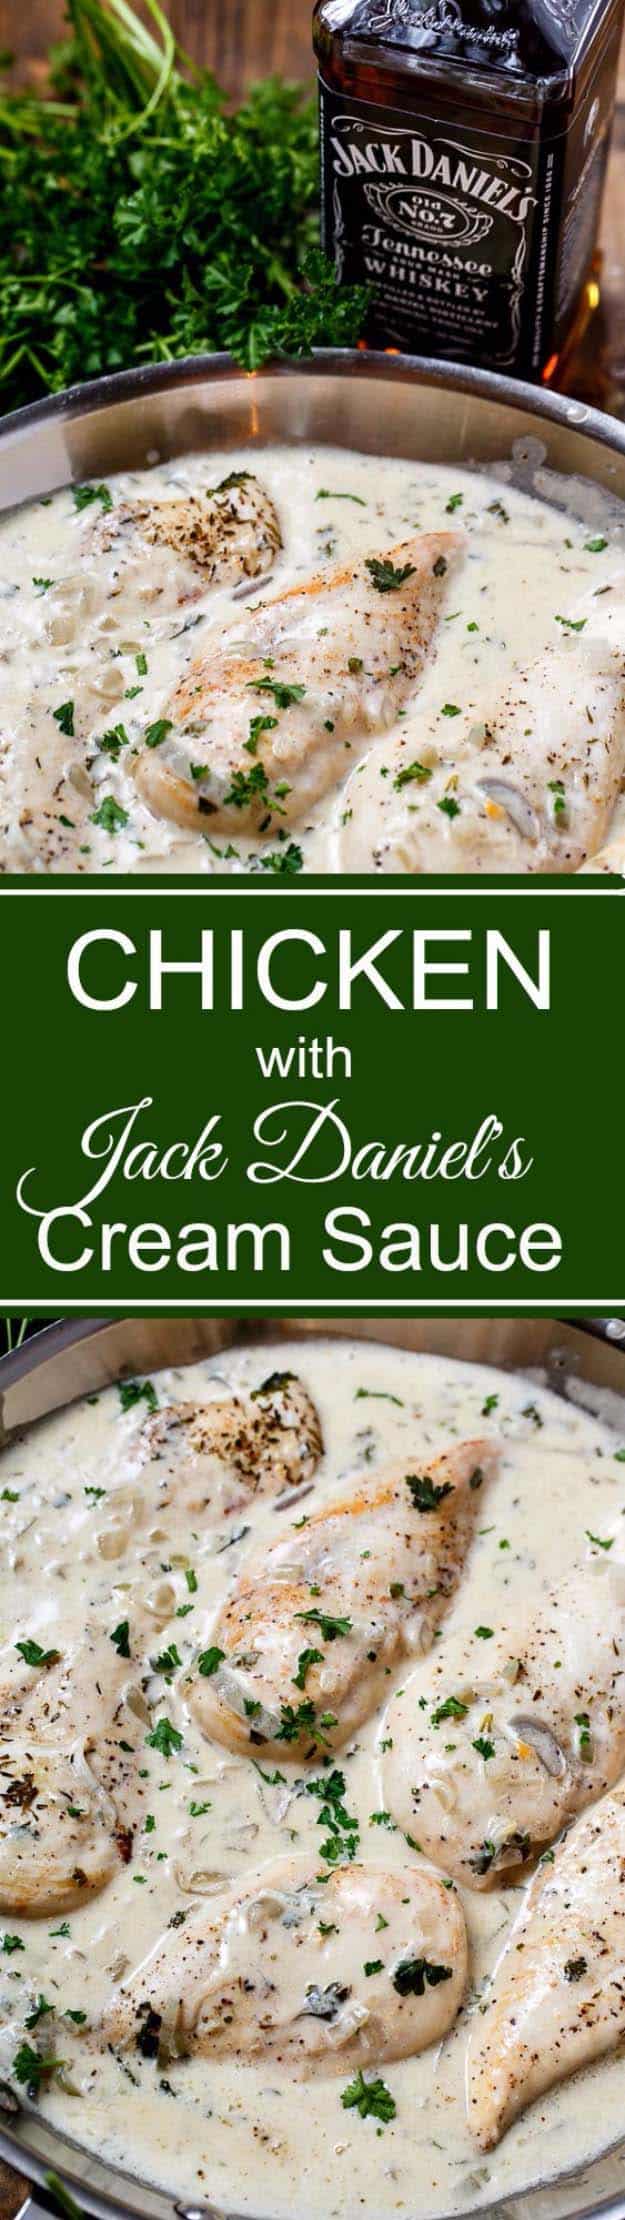 Fun DIY Ideas Made With Jack Daniels - Recipes, Projects and Crafts With The Bottle, Everything From Lamps and Decorations to Fudge and Cupcakes | Chicken in Jack Daniels Cream Sauce #diy #jackdaniels #recipes #crafts